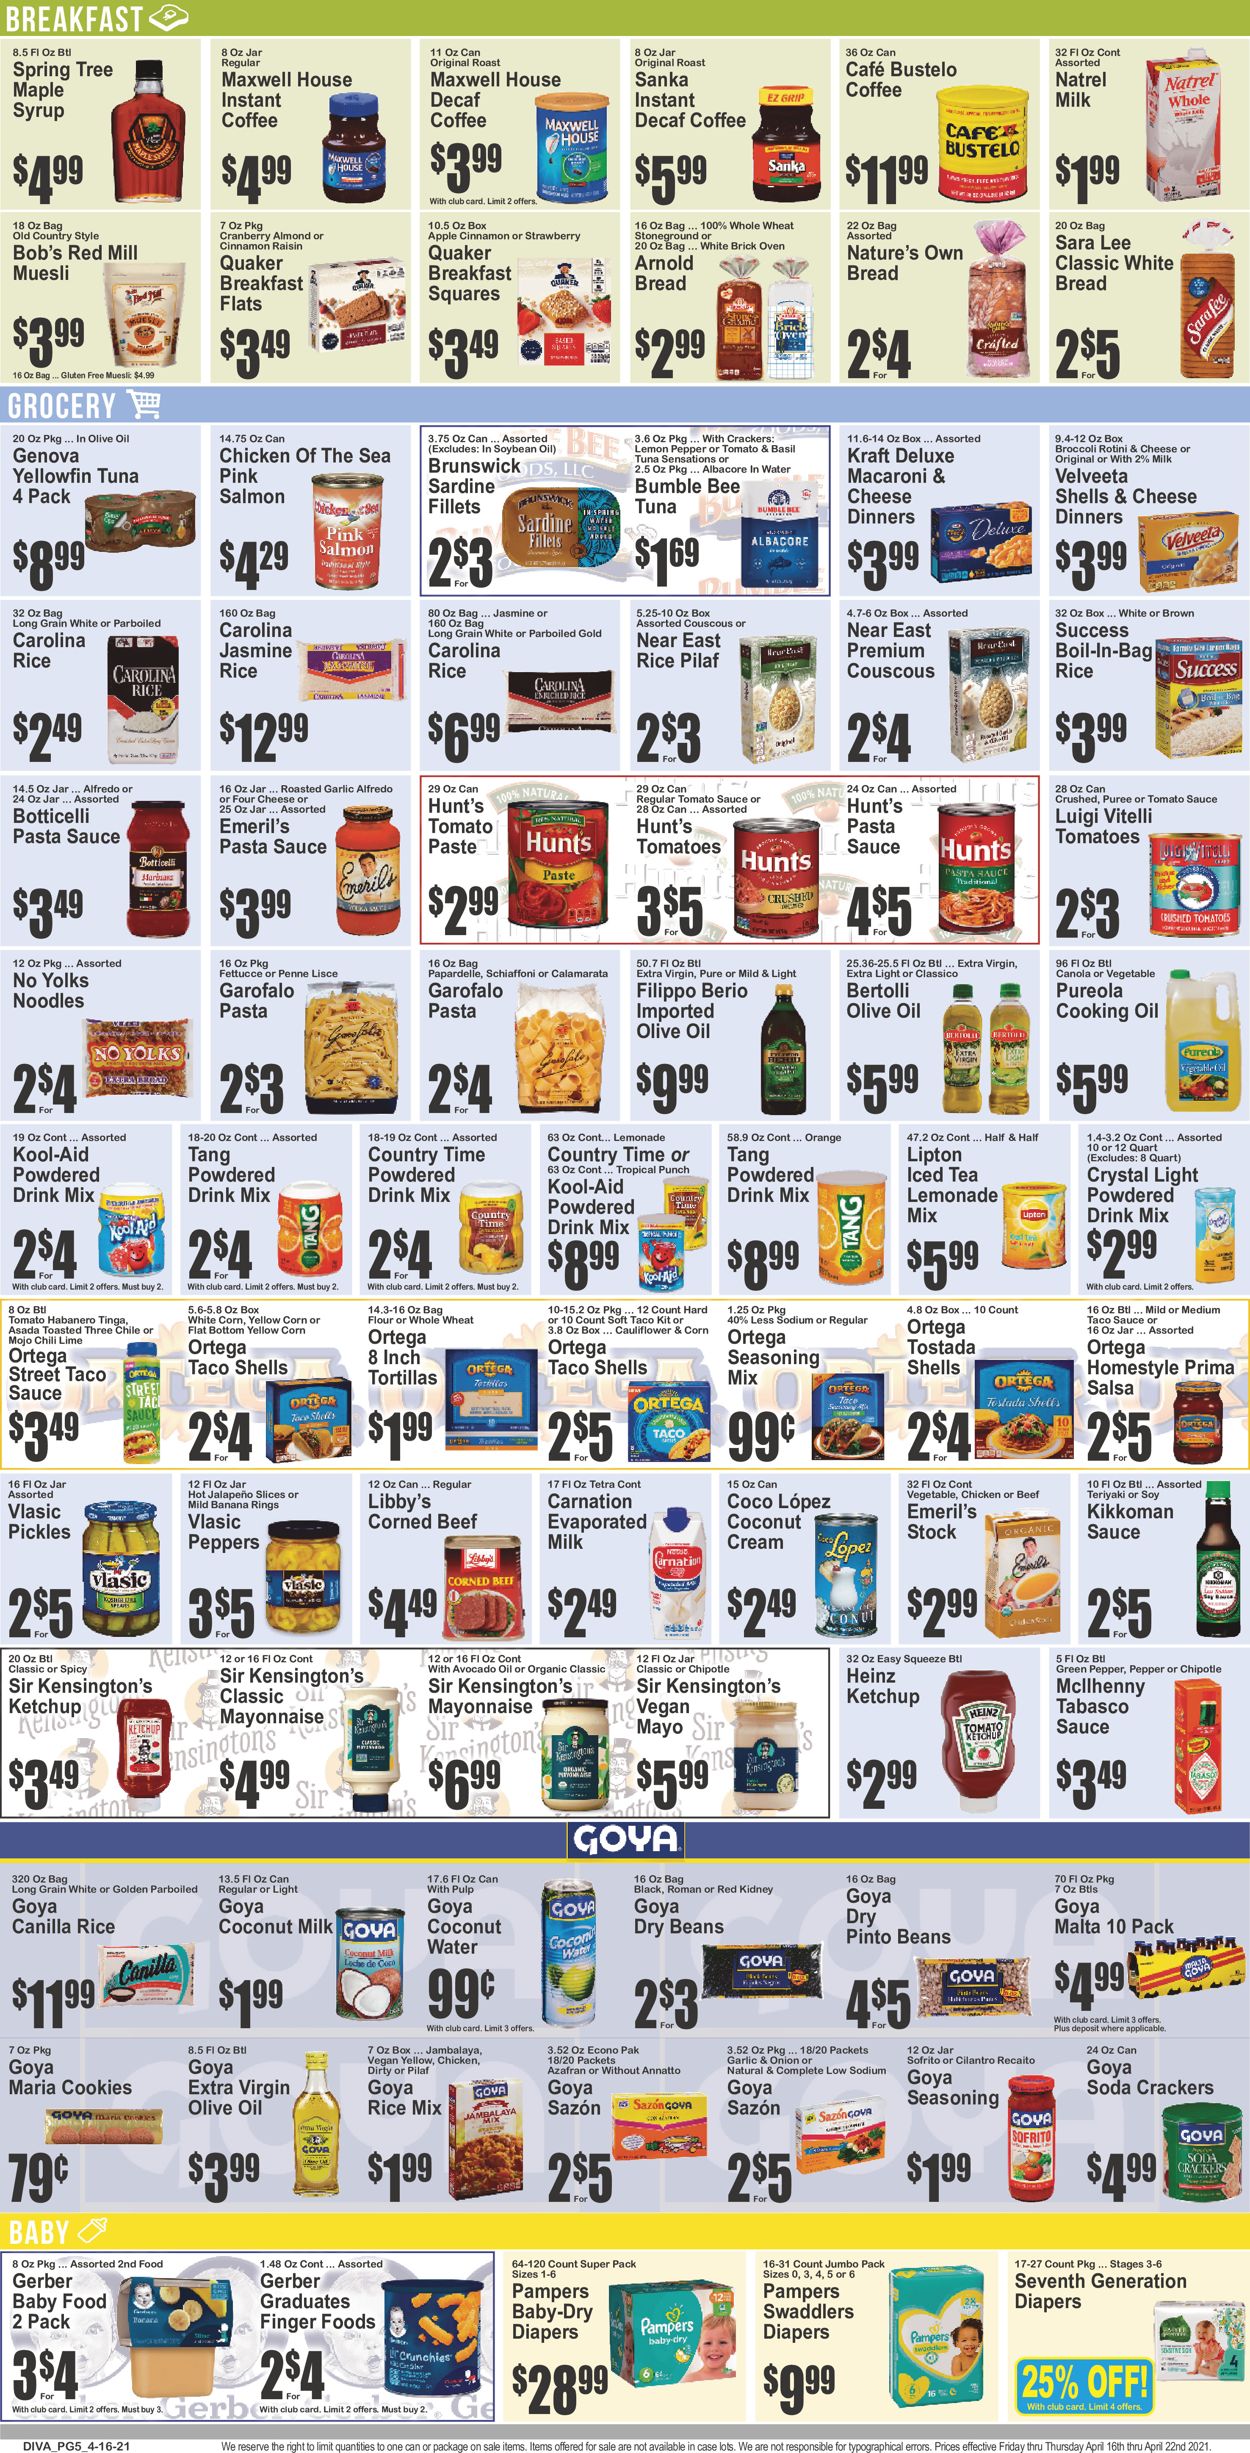 Key Food Ad from 04/16/2021